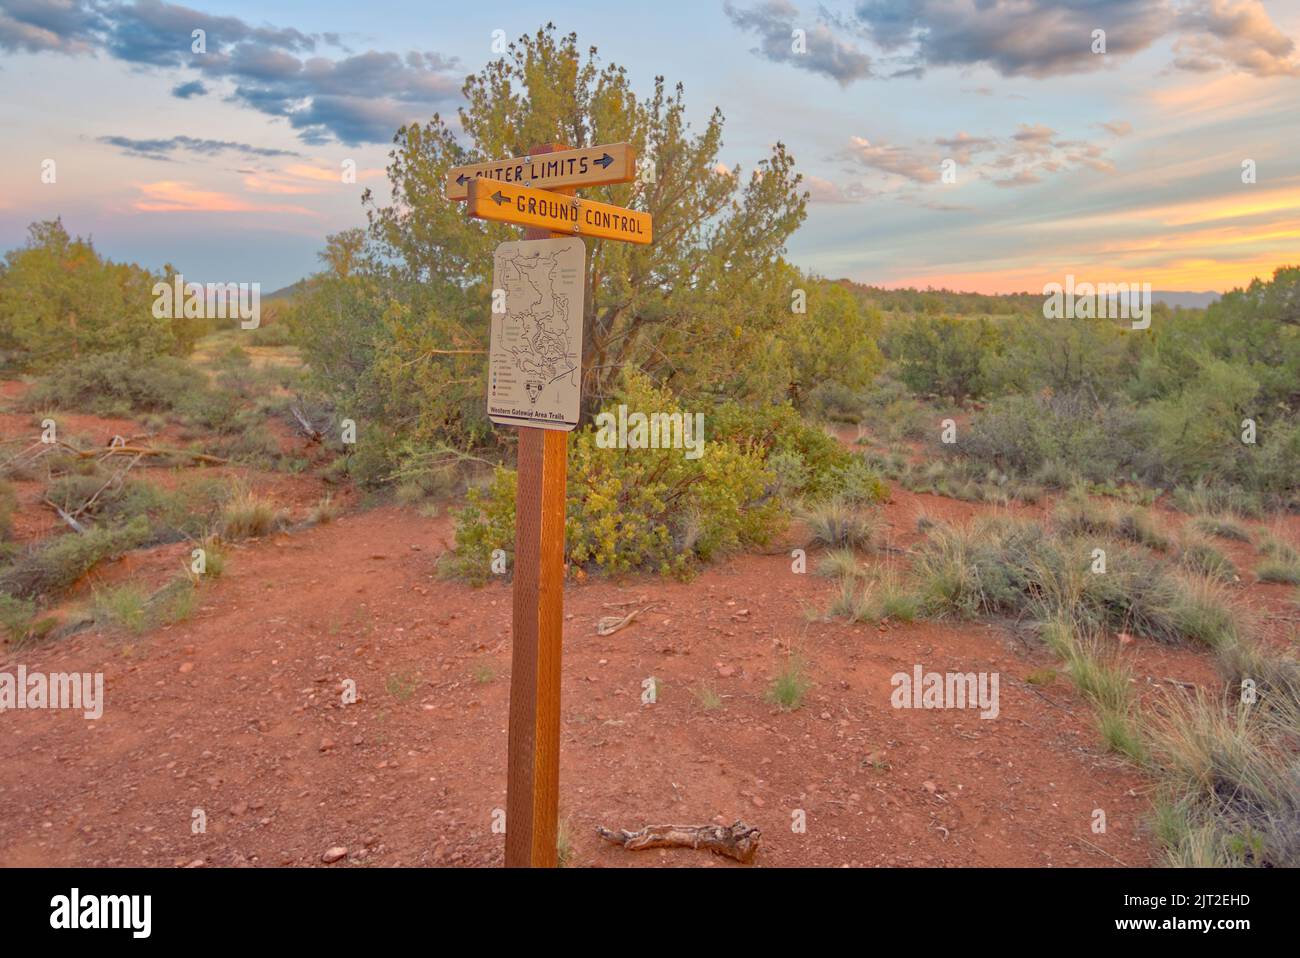 The junction of the Outer Limits Trail and the Ground Control Trail on the west side of Cockscomb Butte in Sedona Arizona. Stock Photo